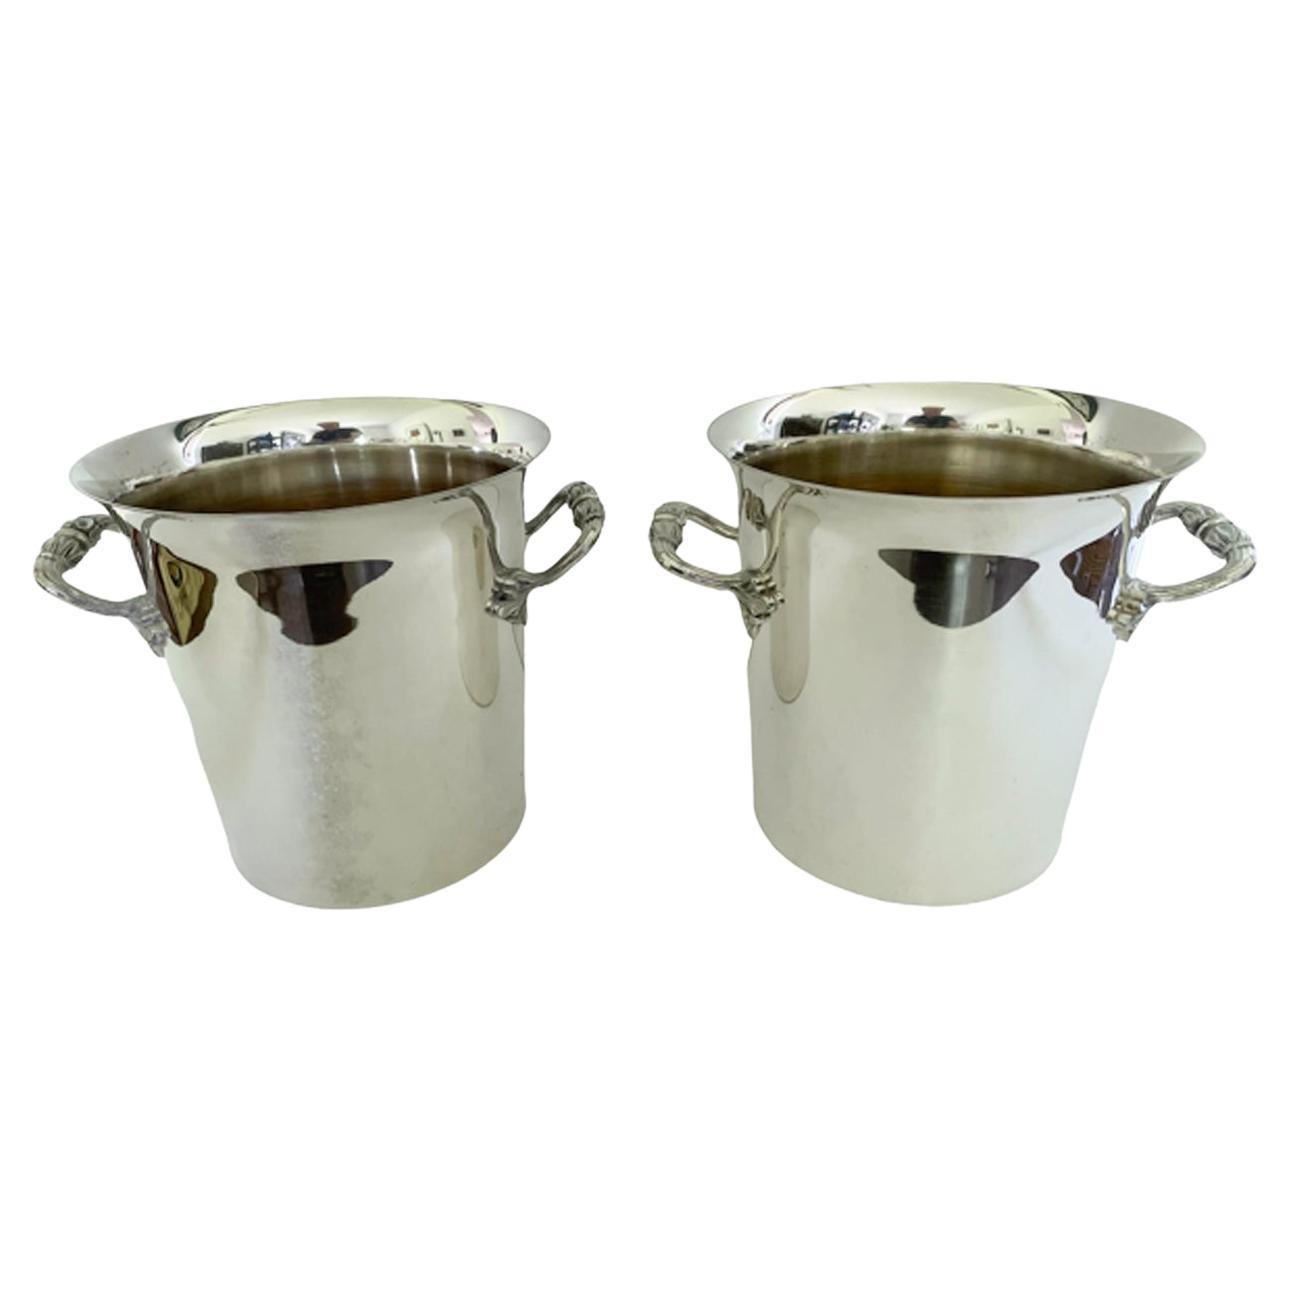 Pair of French Art Deco Silver Plate Champagne Buckets / Wine Coolers